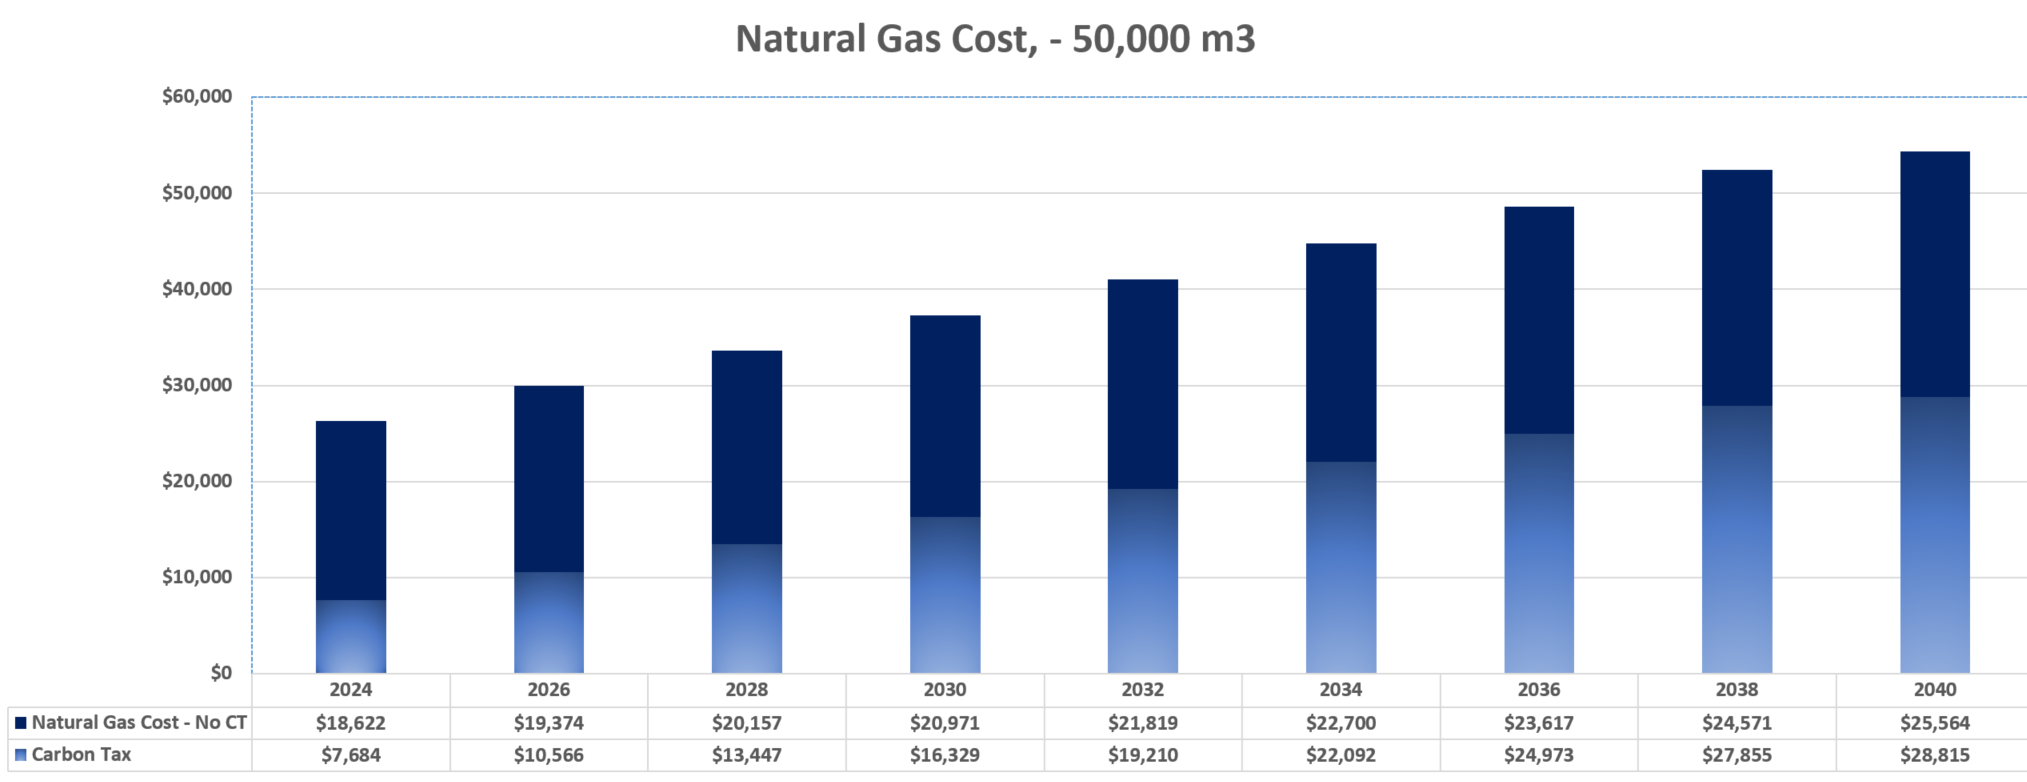 Natural Gas Cost